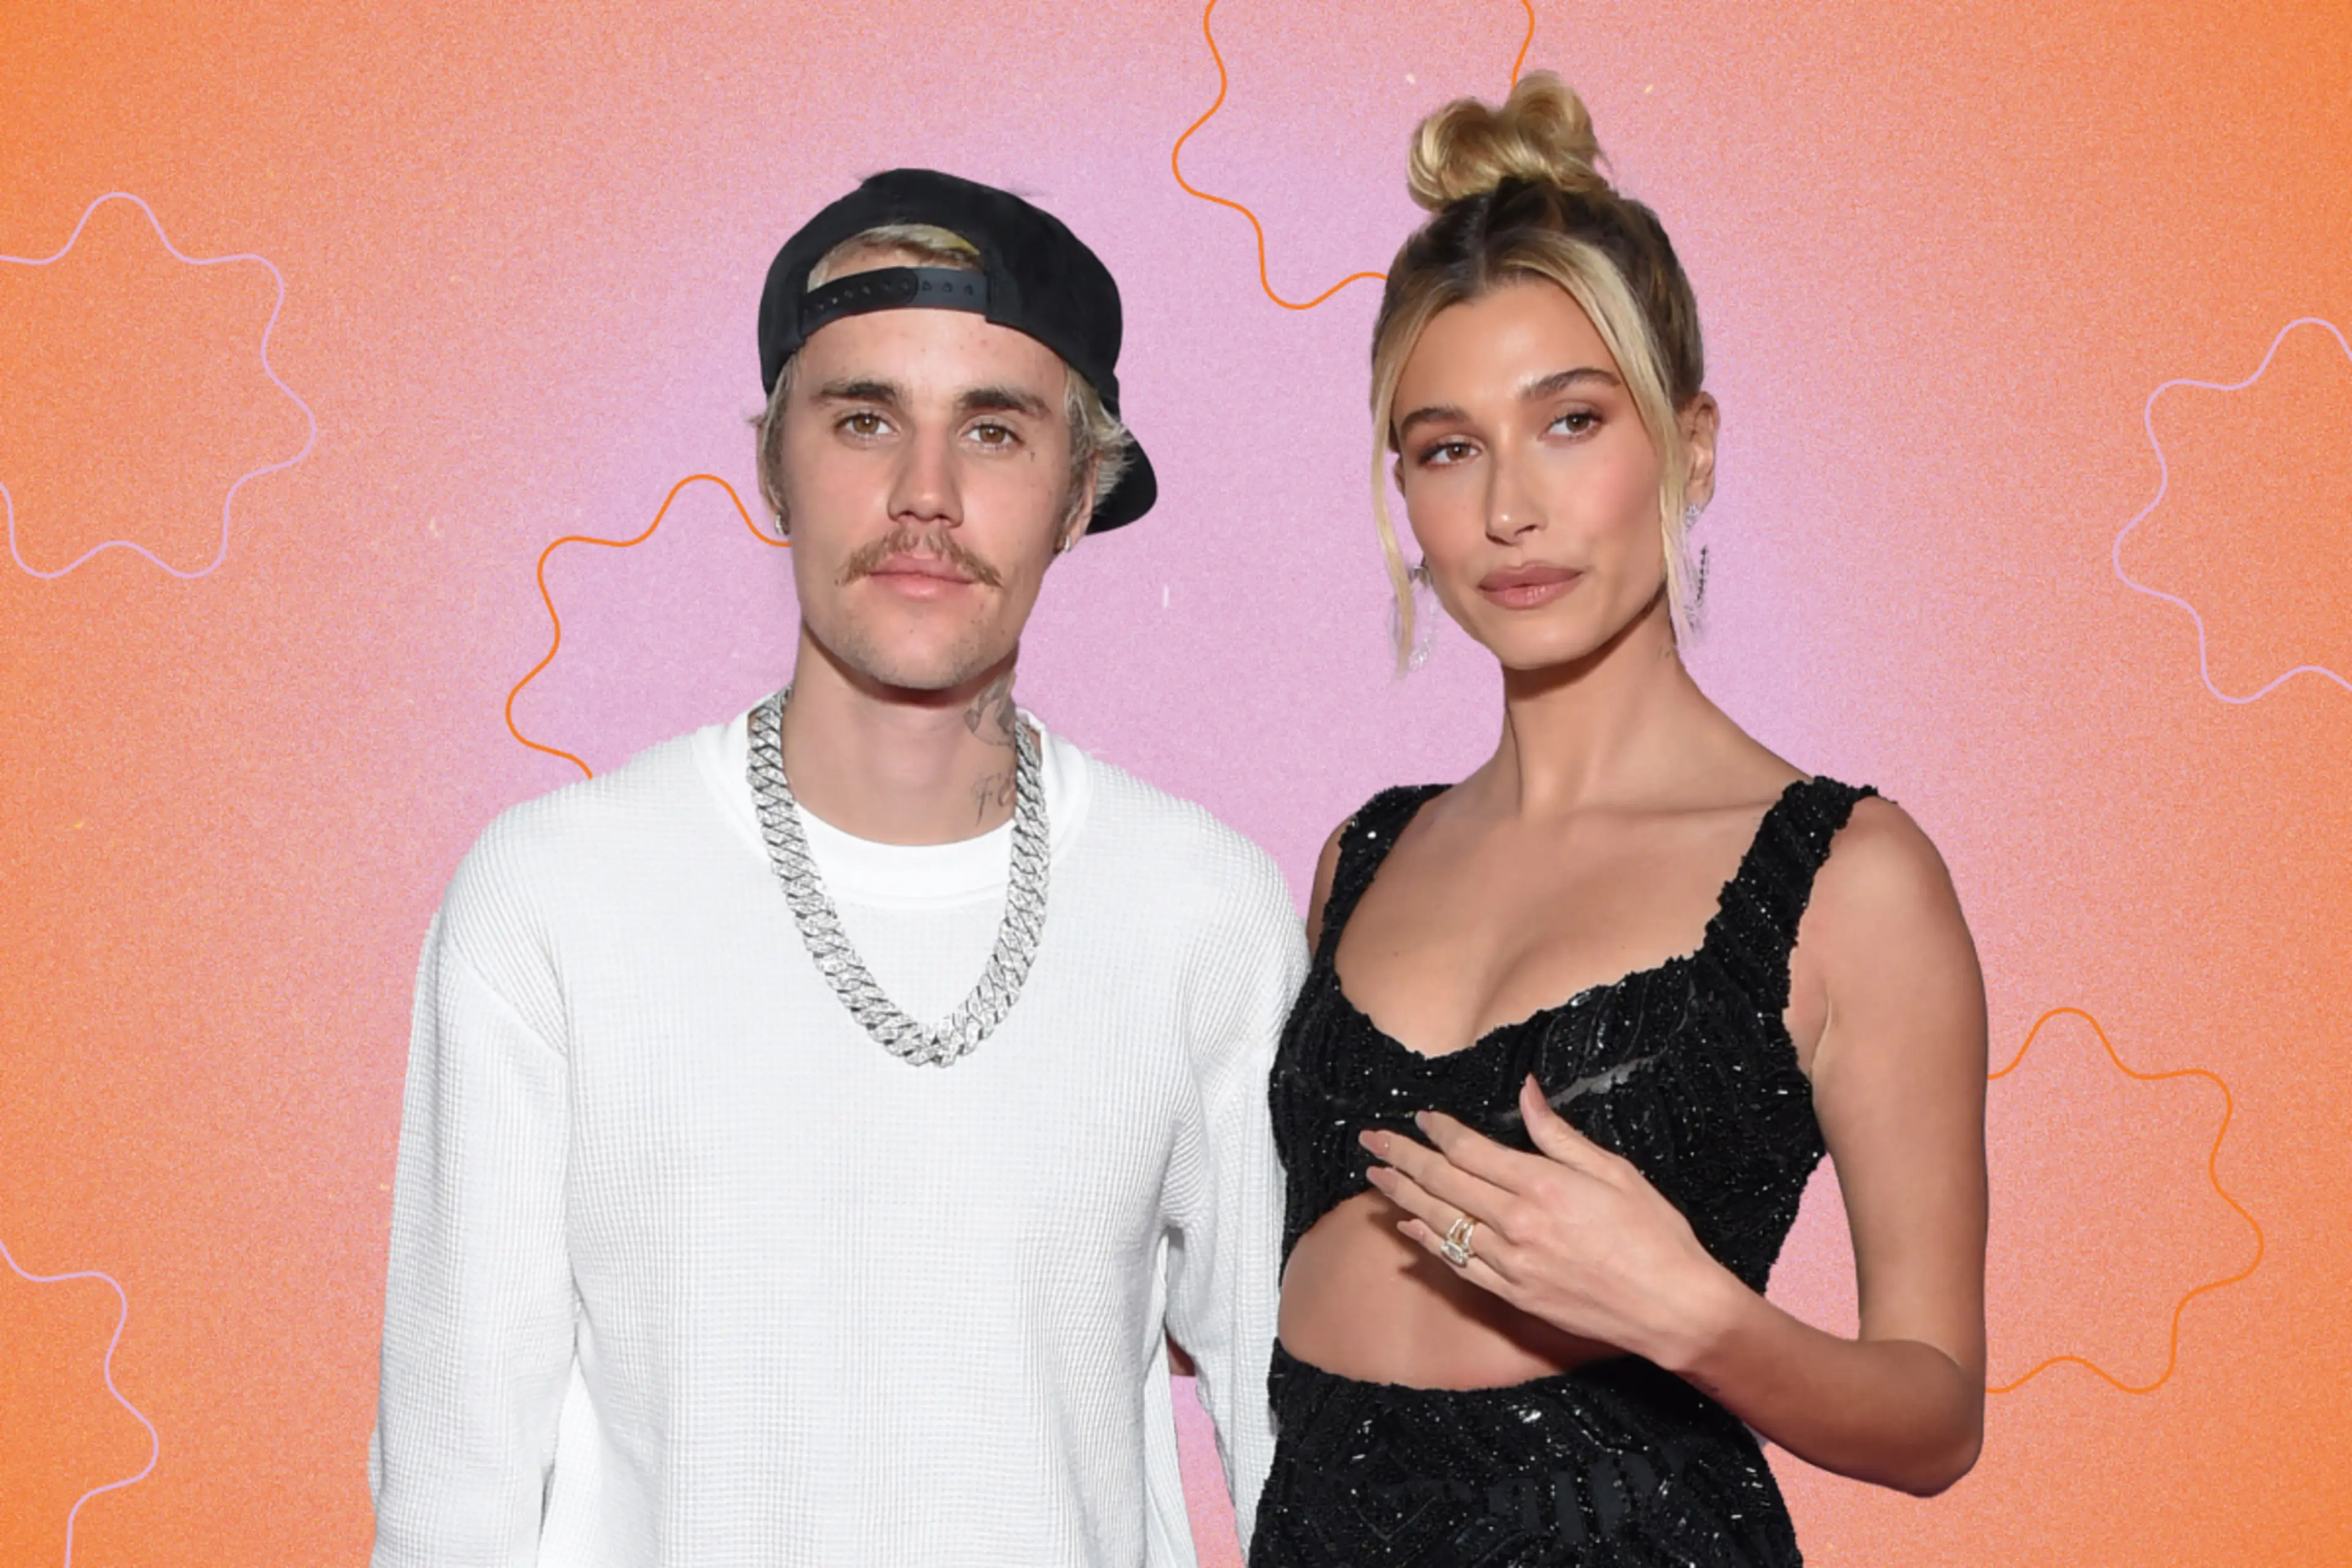 Congratulations to the Biebers—Now Let’s Leave Them Alone!